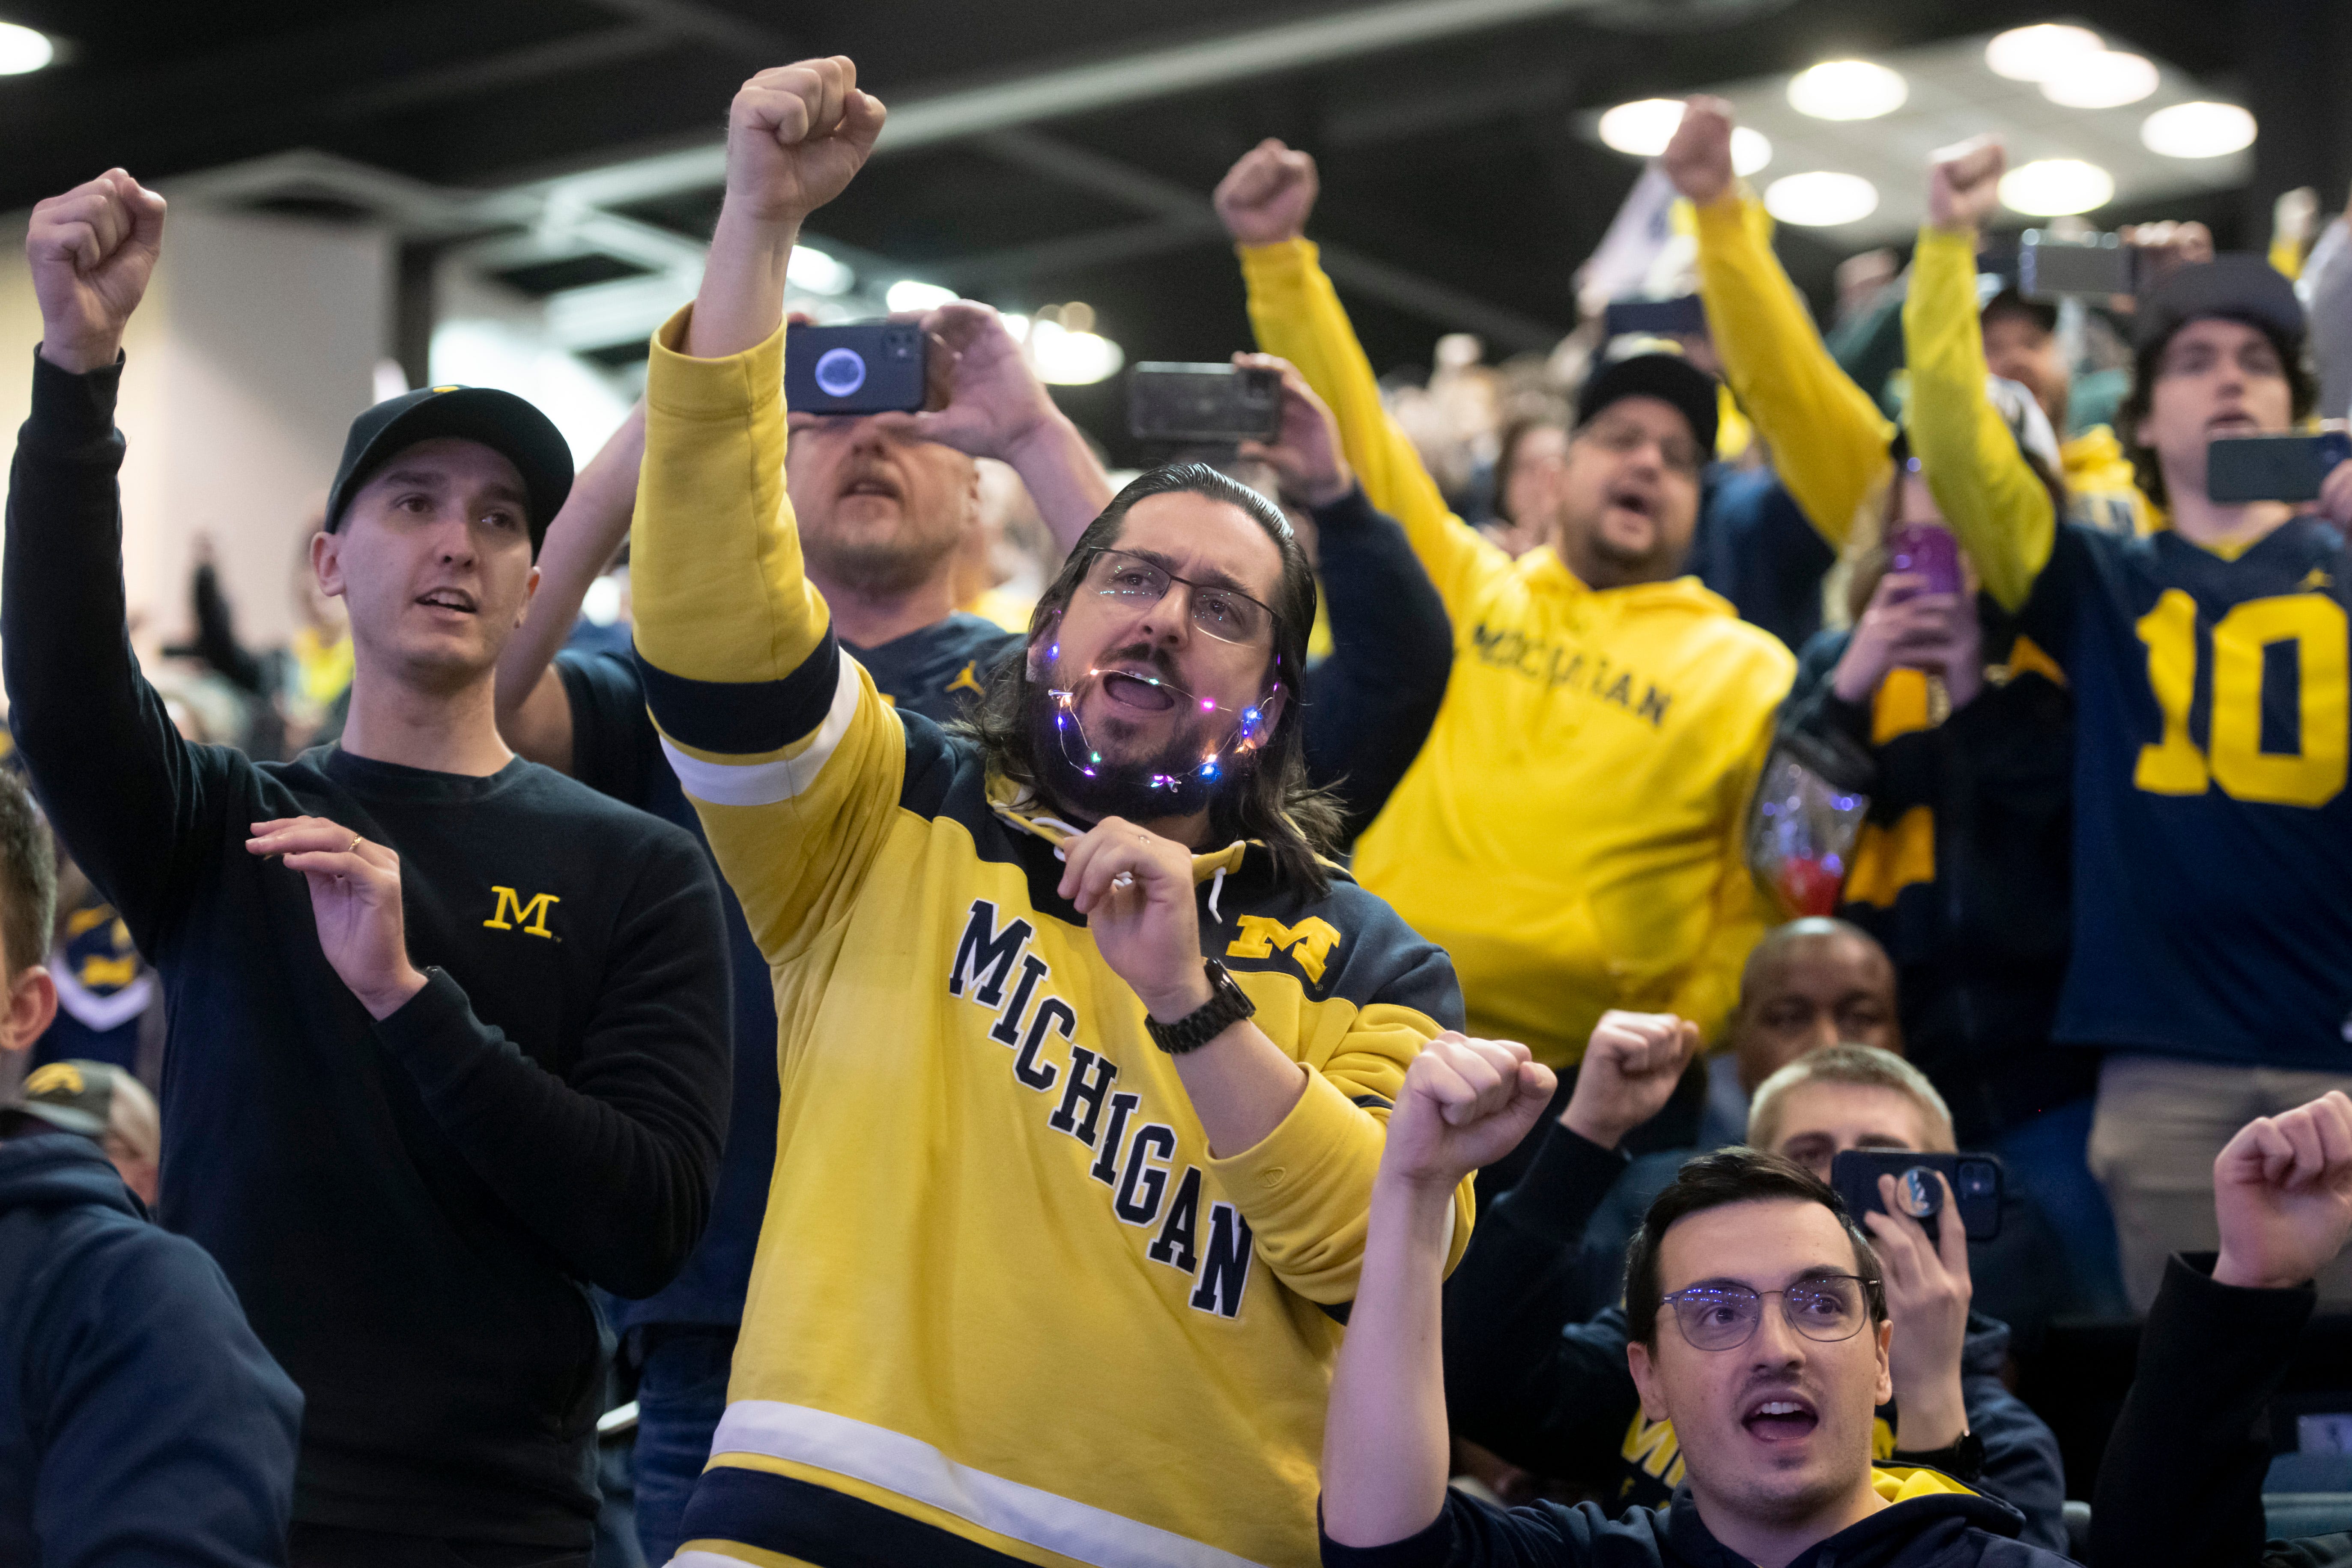 Fans cheer with the Michigan Marching Band at the Fan Fest at the Indiana Convention Center, before the start of the Big Ten championship game.